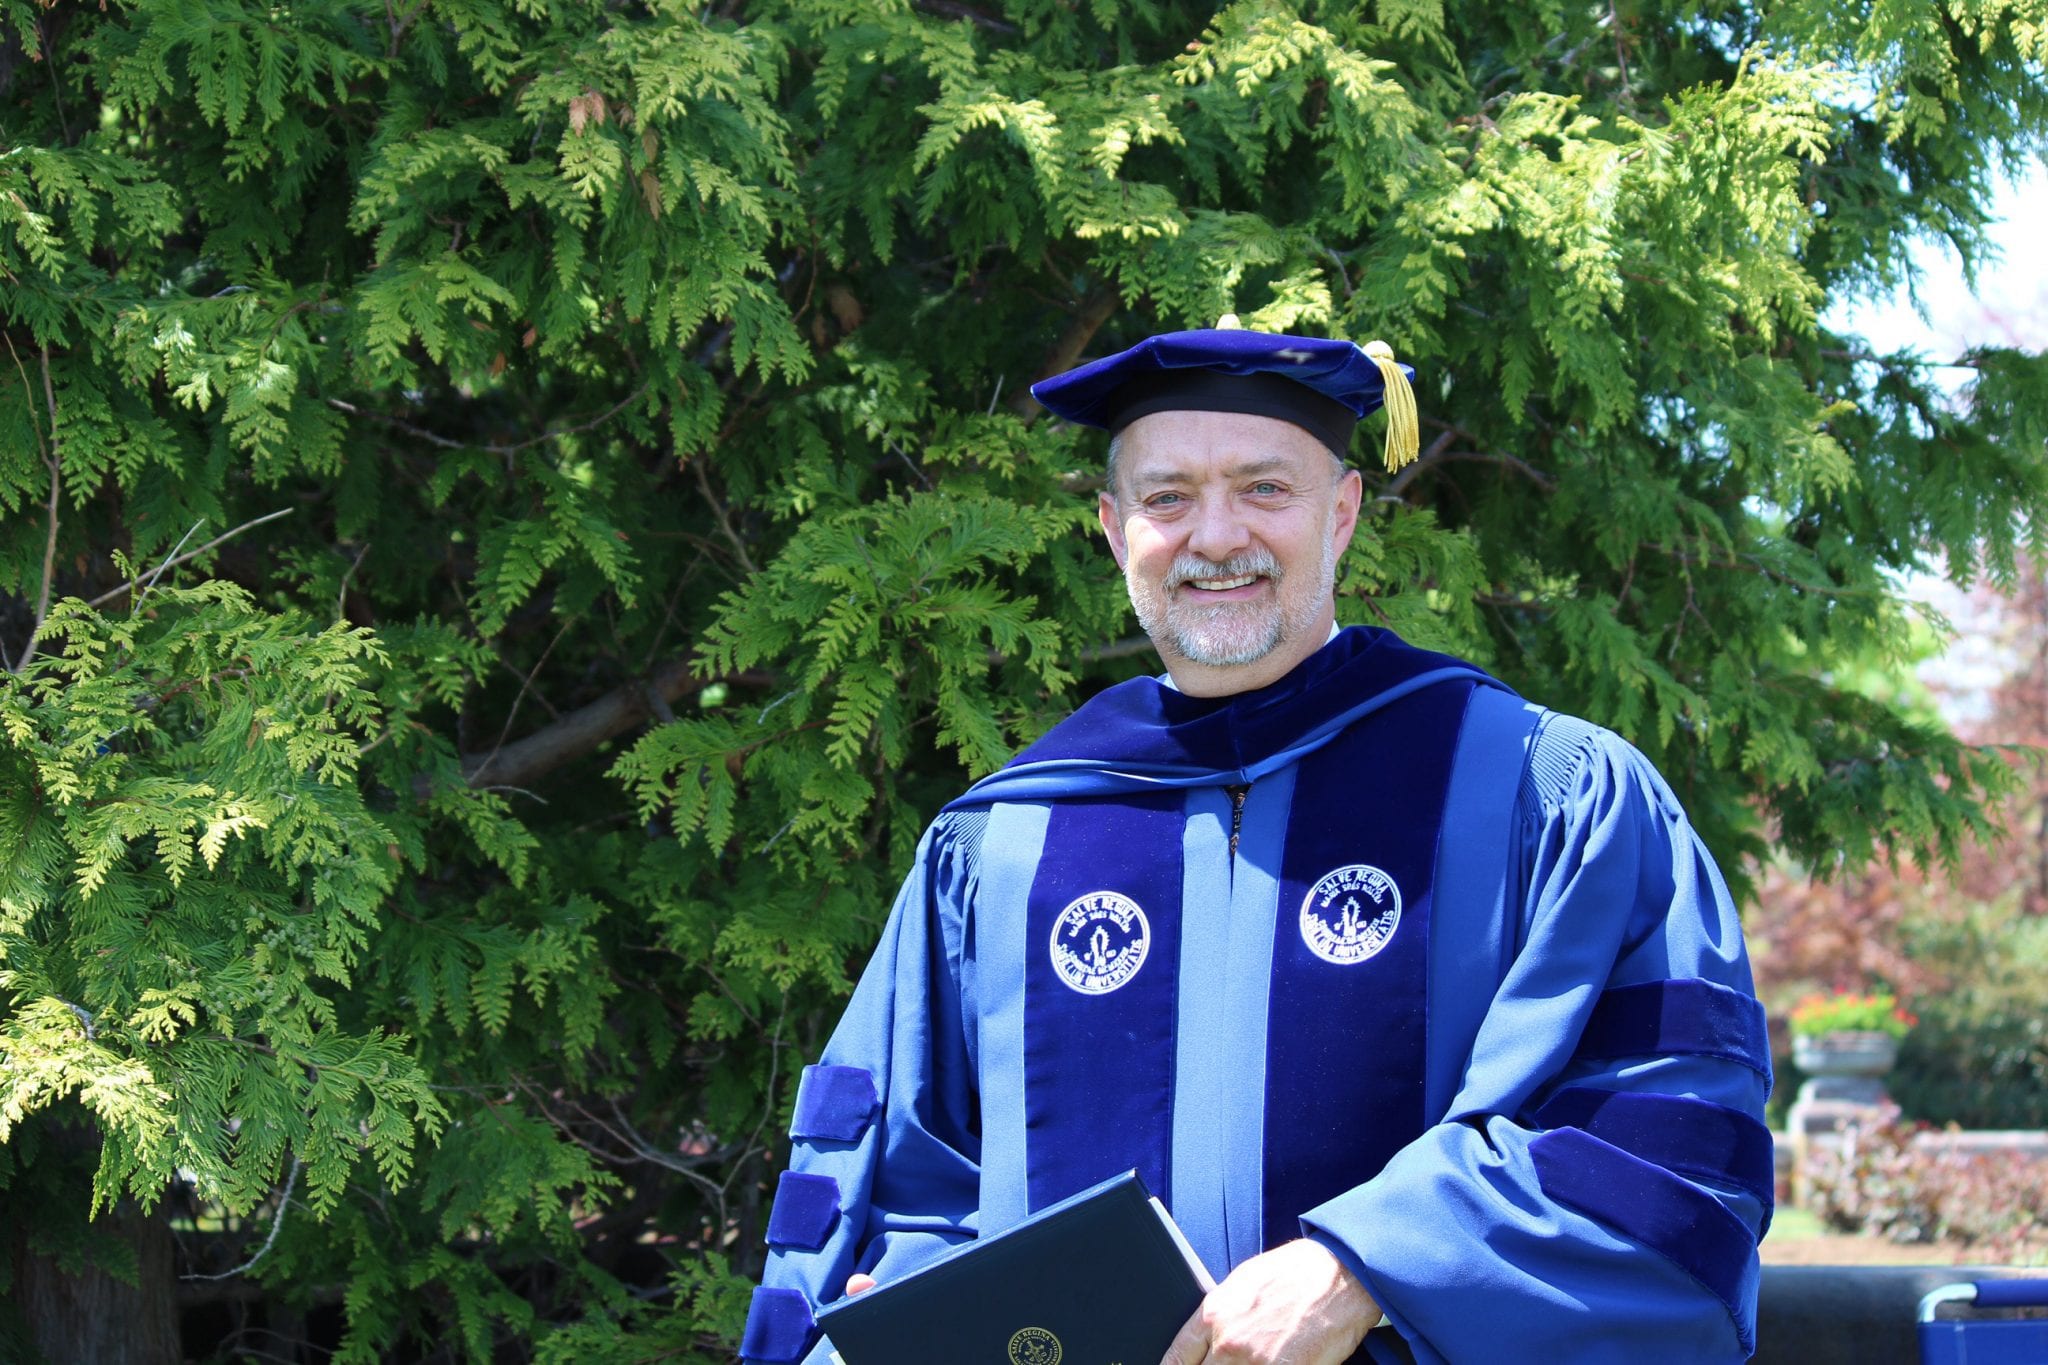 Dr. Stephen L. Jackson '09 smiles after receiving his Ph.D. in humanities from Salve Regina University. The late Dr. Donna T. McCaffrey ’73G, ’83Ph.D., & ’87G wrote a letter of recommendation for his entry into the program. 